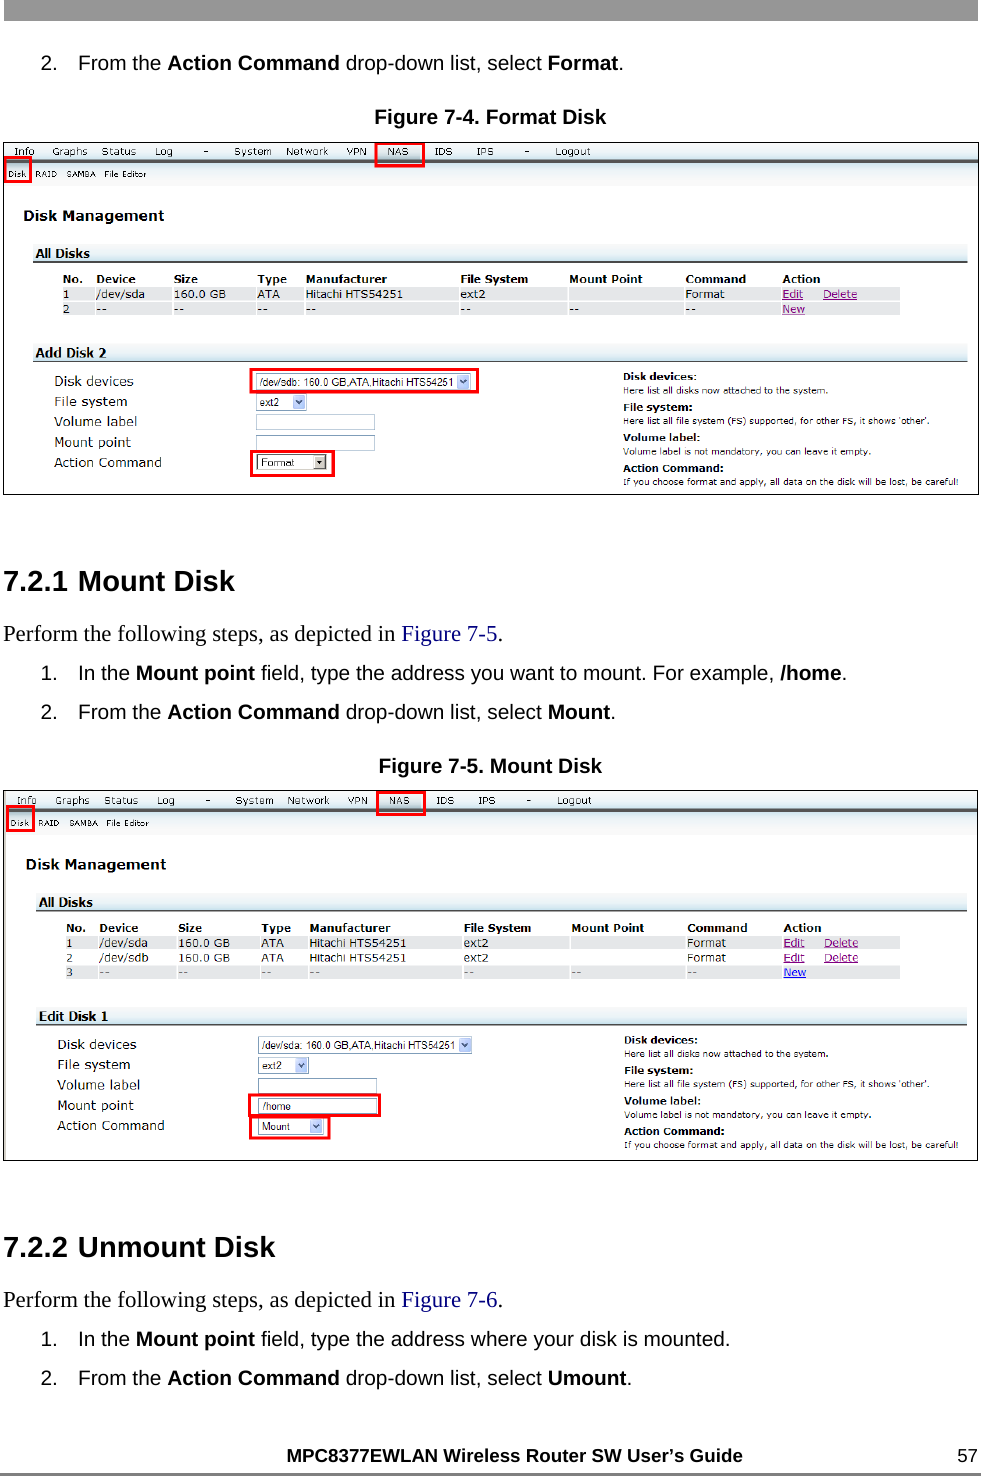                                                          MPC8377EWLAN Wireless Router SW User’s Guide    57 2. From the Action Command drop-down list, select Format. Figure 7-4. Format Disk  7.2.1 Mount Disk Perform the following steps, as depicted in Figure 7-5. 1. In the Mount point field, type the address you want to mount. For example, /home. 2. From the Action Command drop-down list, select Mount. Figure 7-5. Mount Disk  7.2.2 Unmount Disk Perform the following steps, as depicted in Figure 7-6. 1. In the Mount point field, type the address where your disk is mounted. 2. From the Action Command drop-down list, select Umount. 